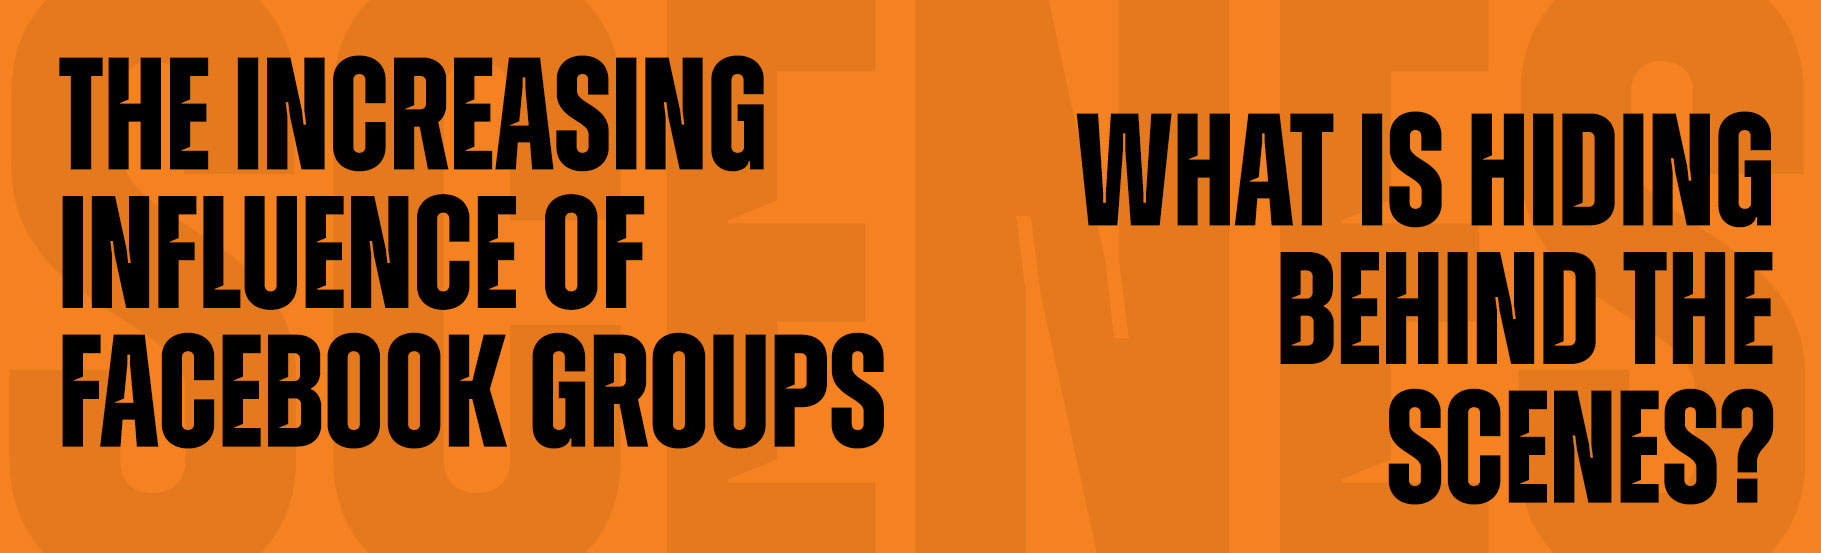 The increasing influence of Facebook groups: What is hiding behind the scenes?